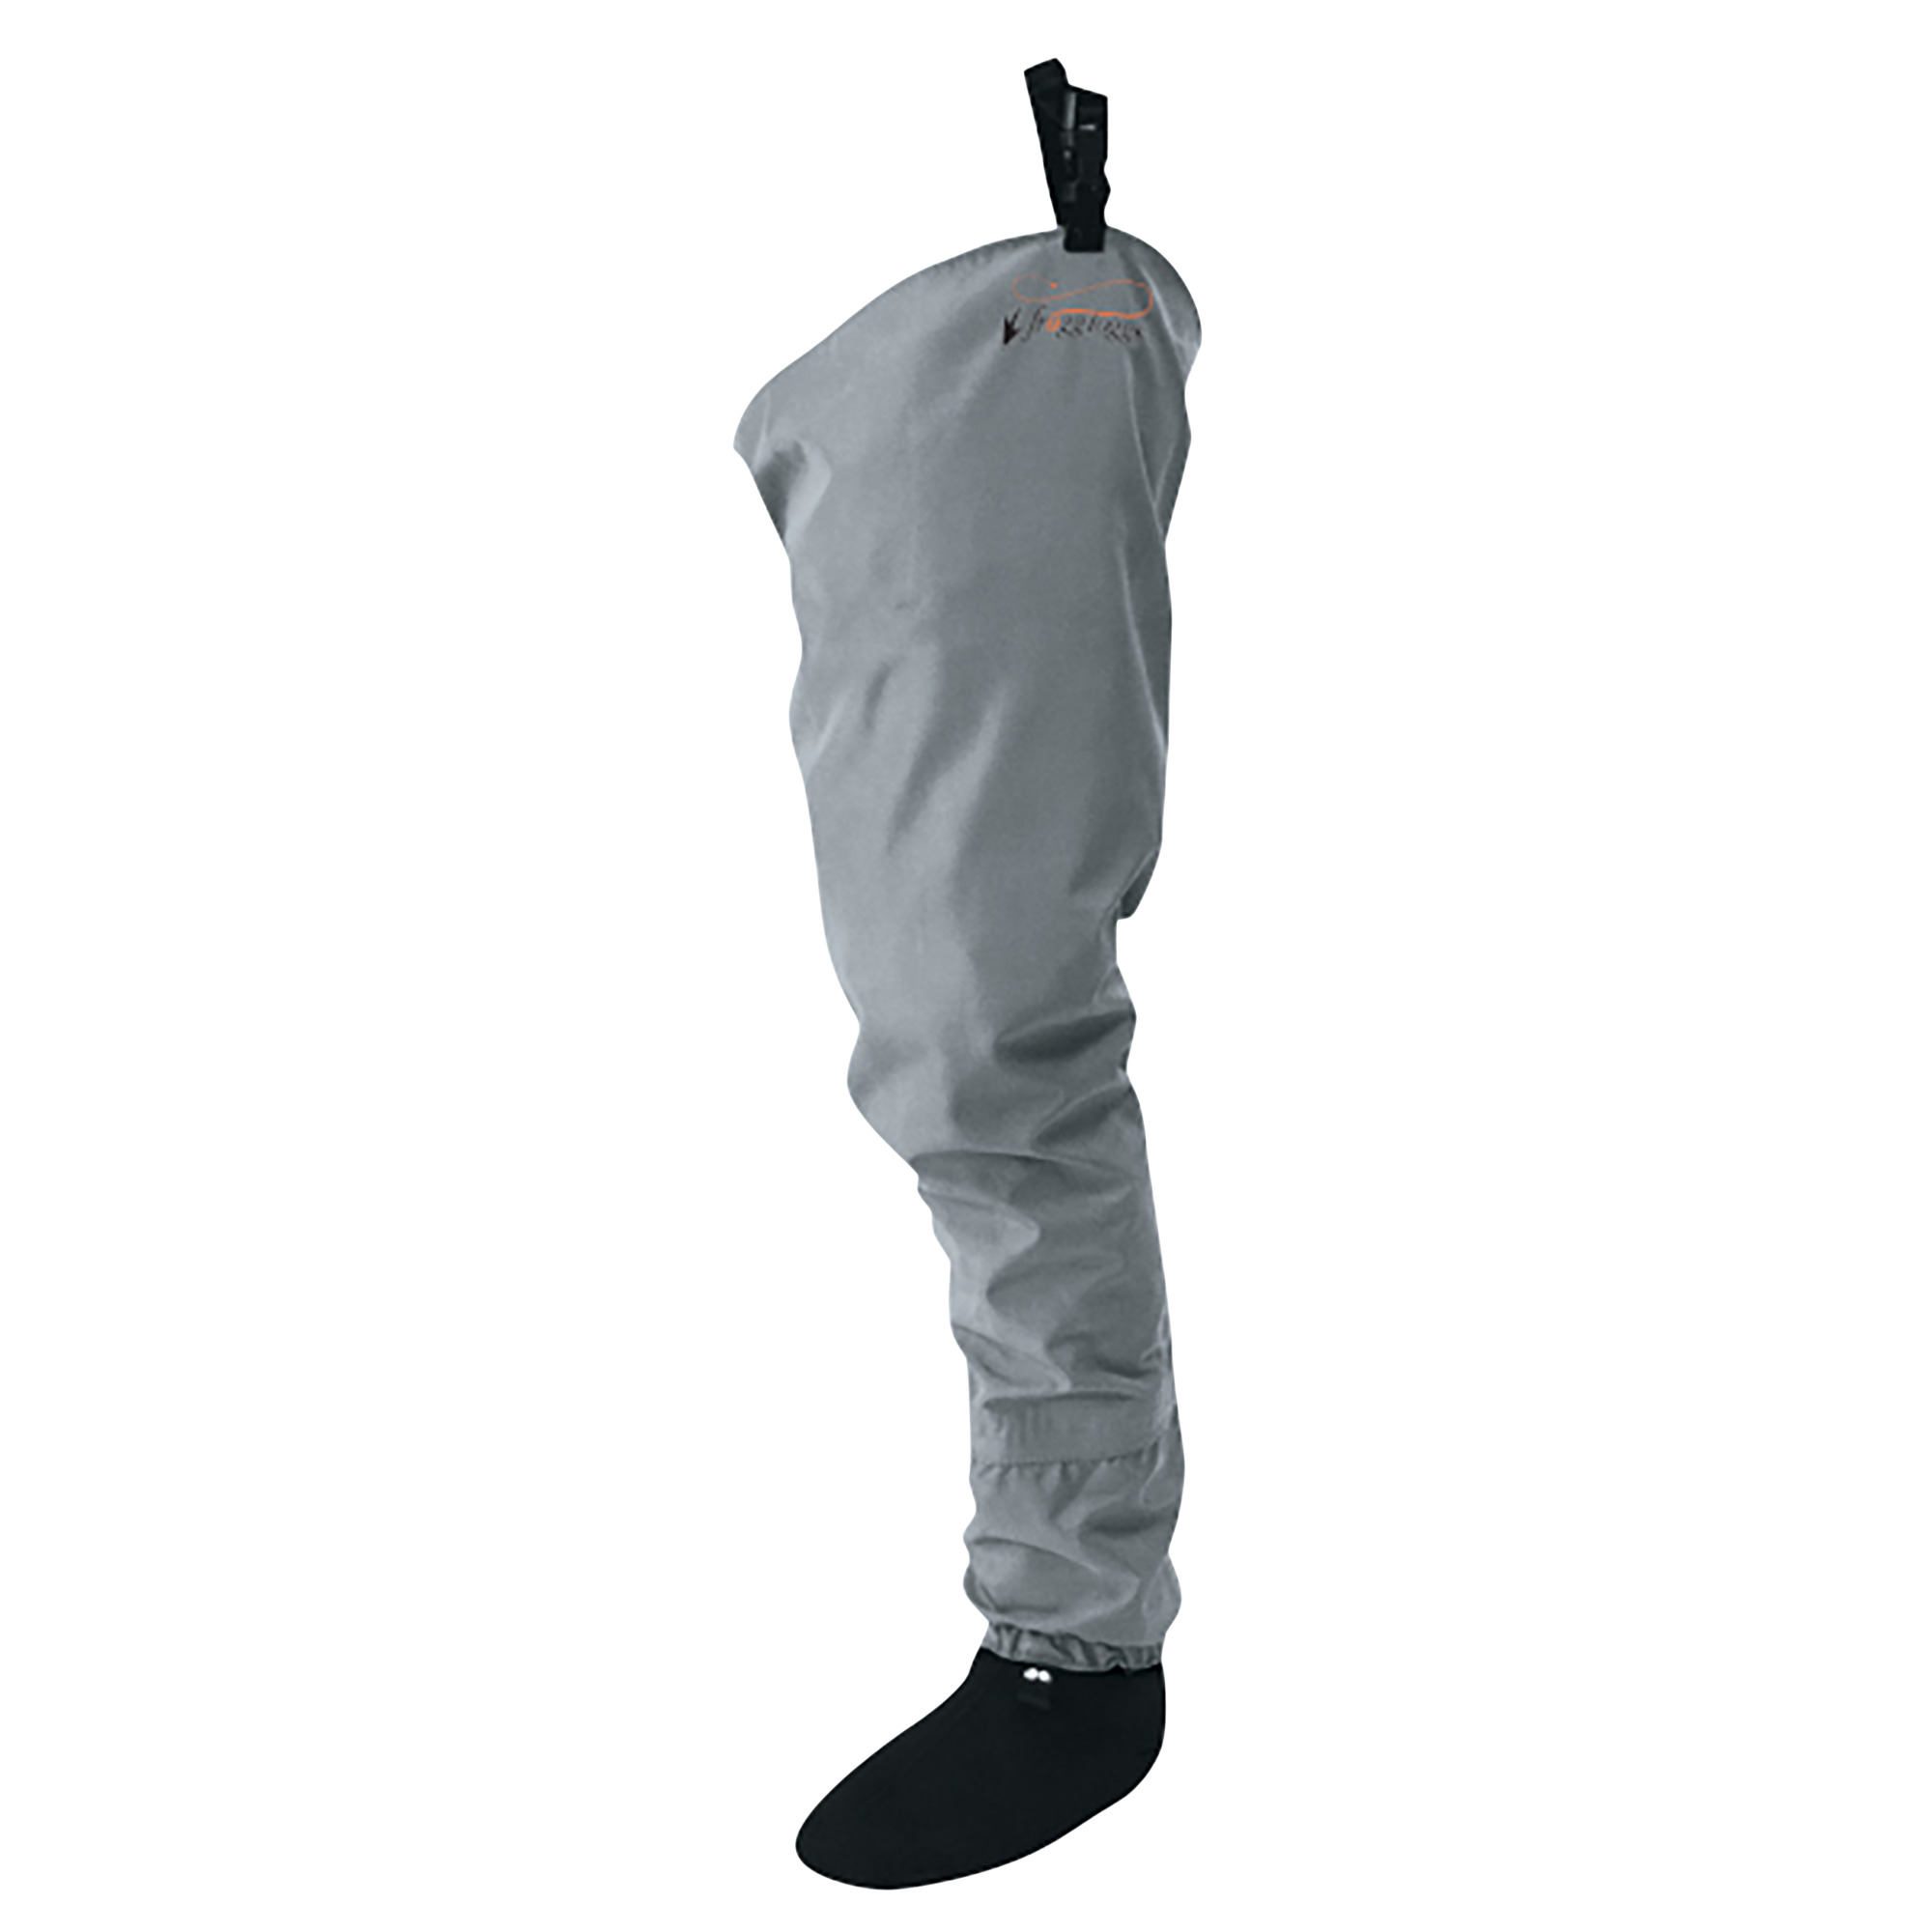 frogg toggs, Canyon II Stockingfoot Breathable Hip Wader, Size M, Width Medium, Color Slate, Model 2711636-MD